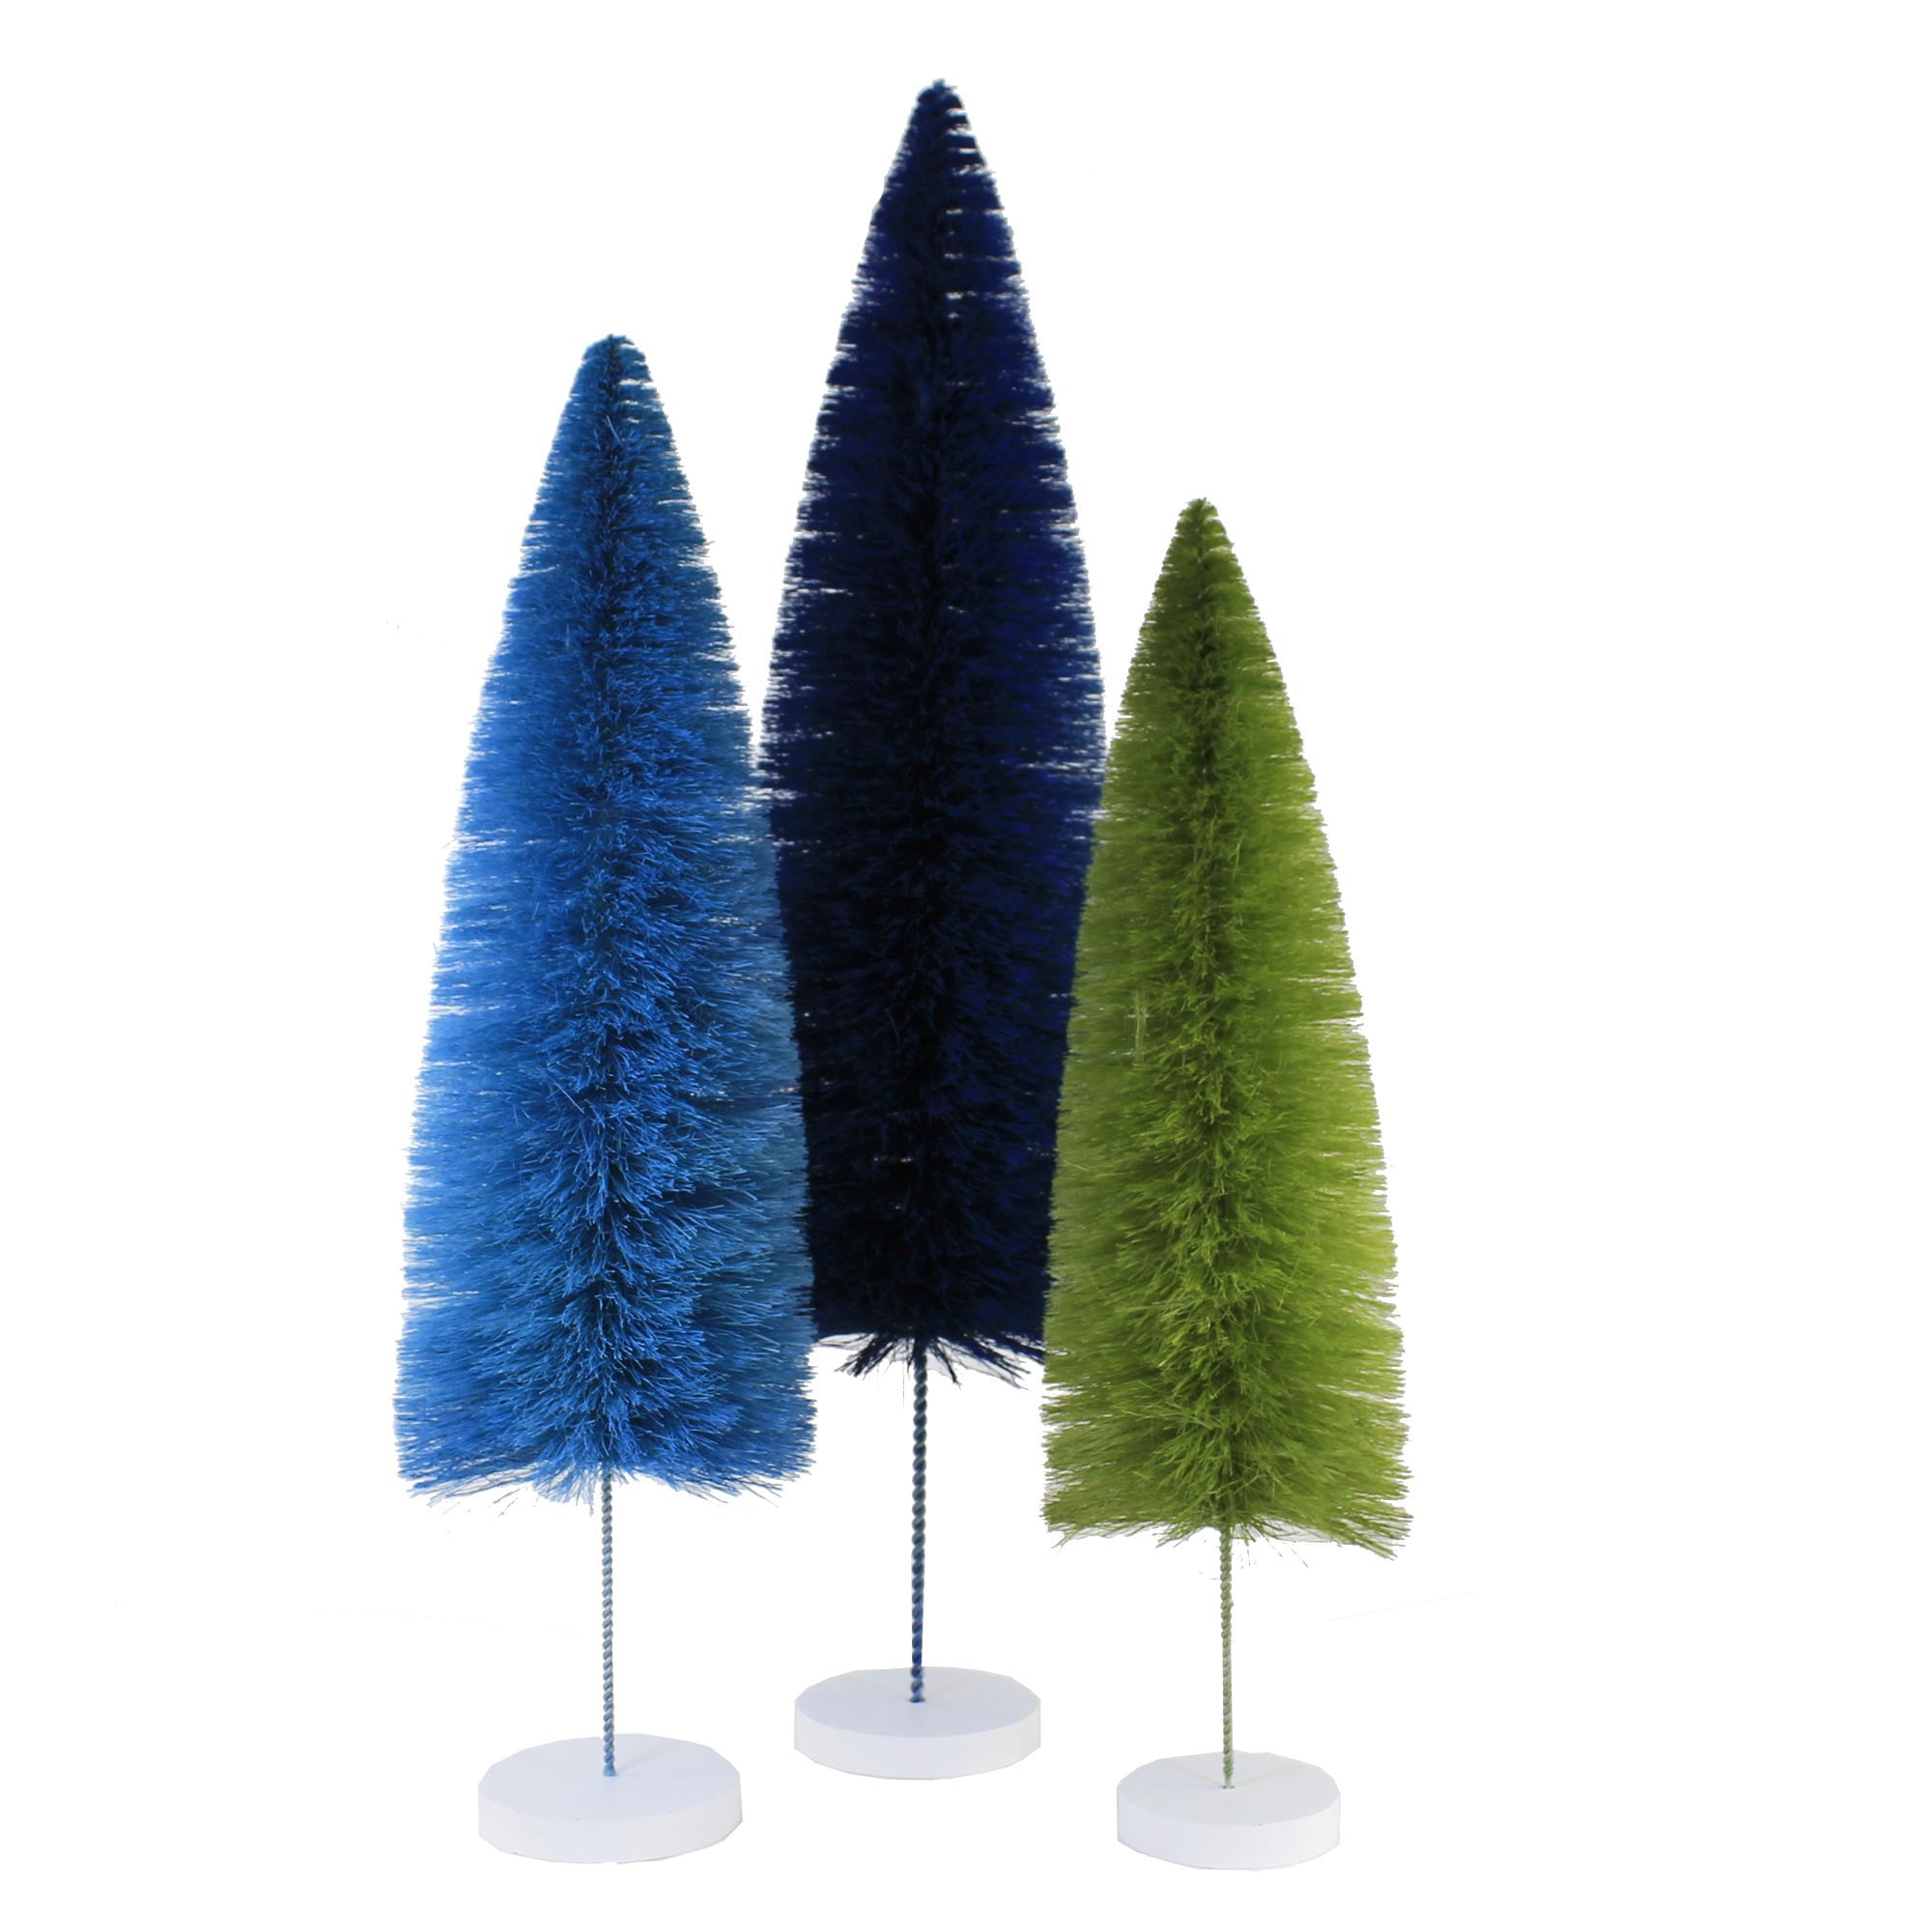 Hobby Store Find - Microbrushes - The Blue Bottle Tree